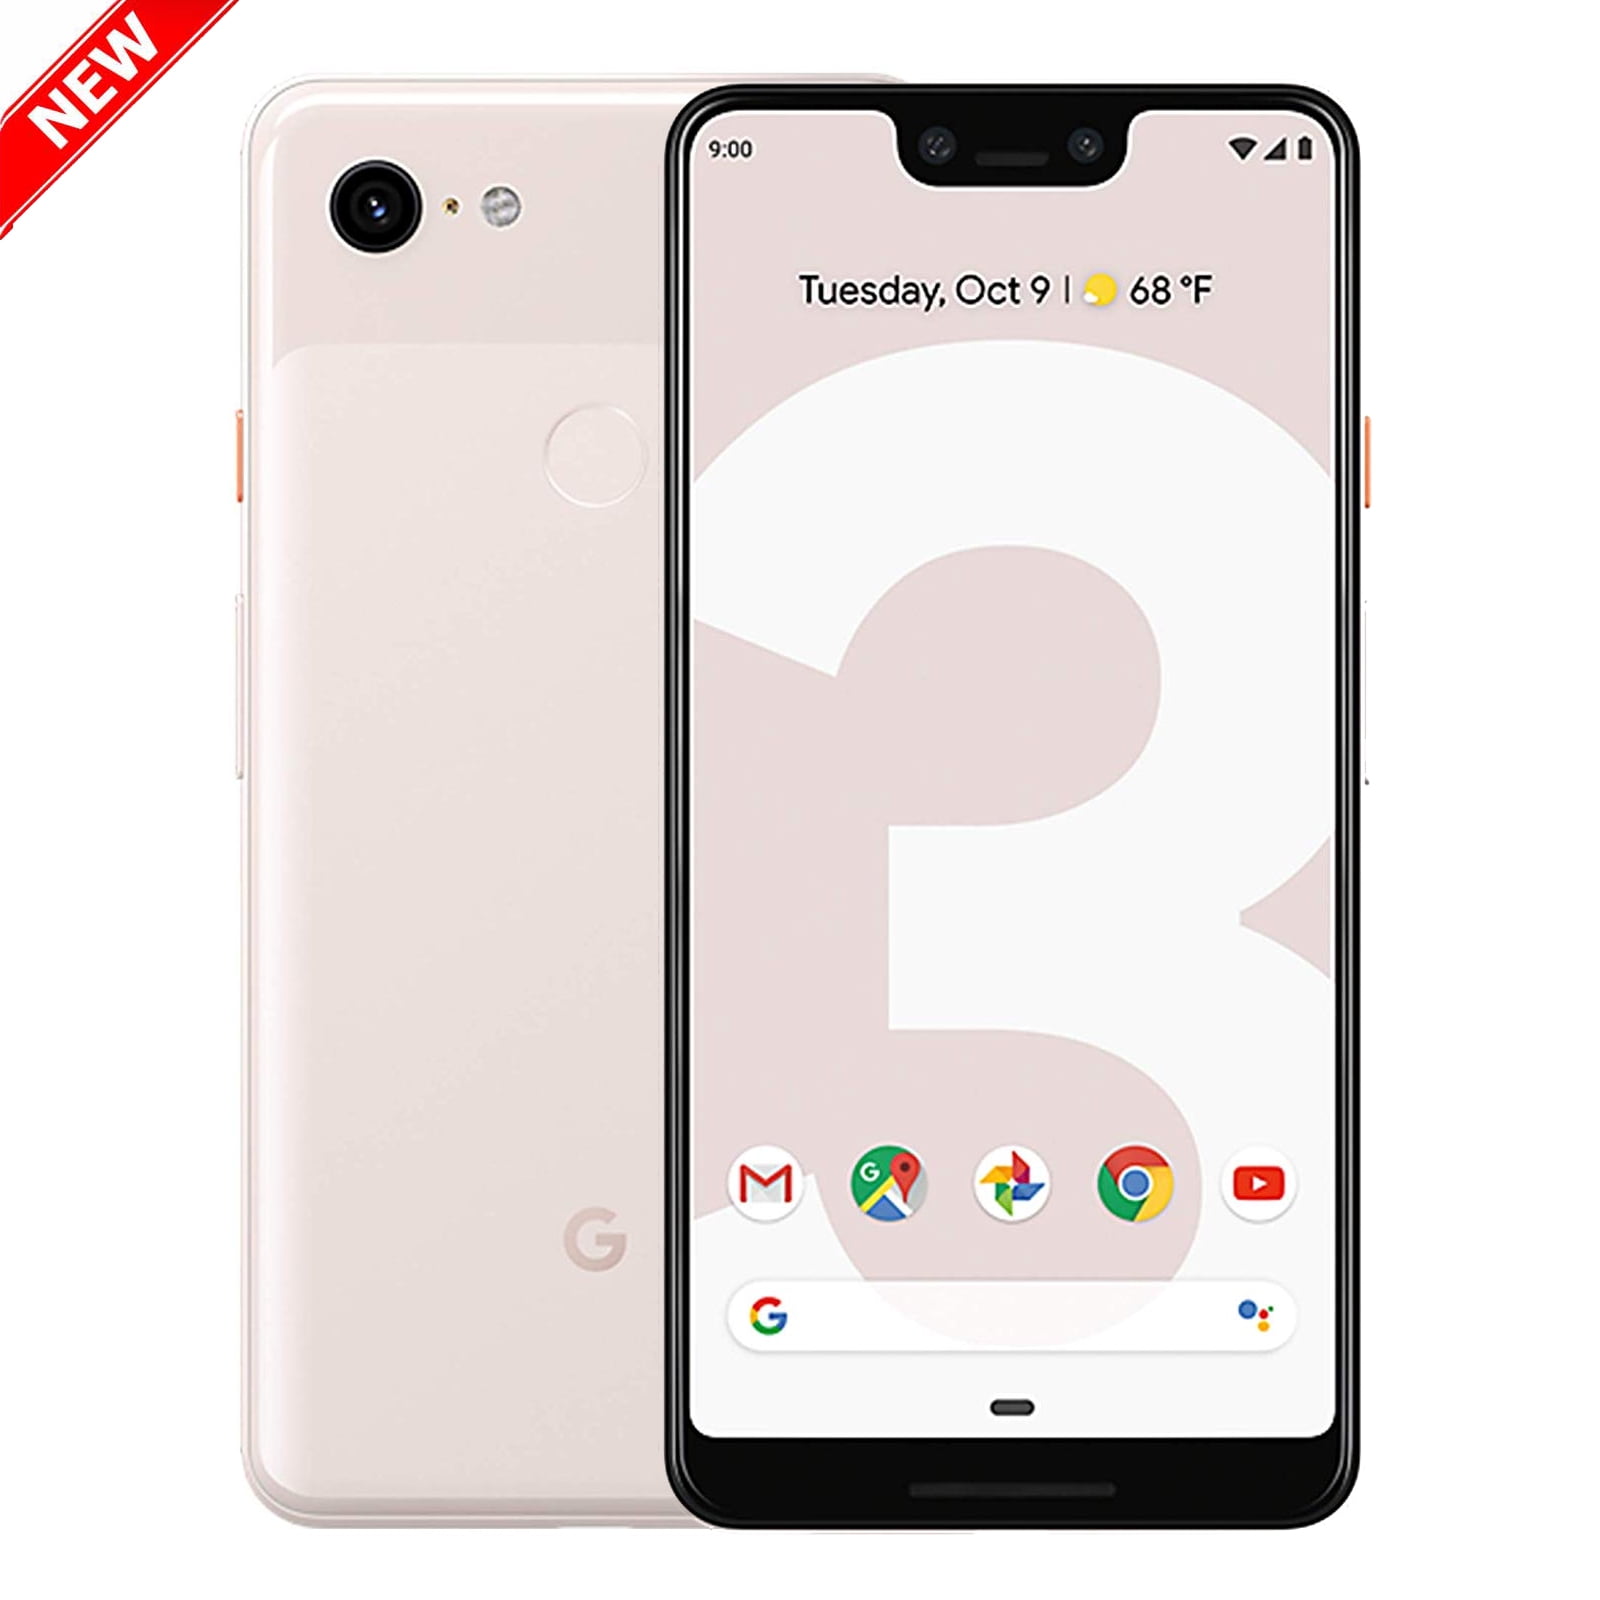 New Pixel 3 XL 64GB Unlocked GSM & CDMA 4G LTE Android Phone w/ 12.2MP Rear & Dual 8MP Front Camera by Google - Not Pink - USA Version - Google Edition